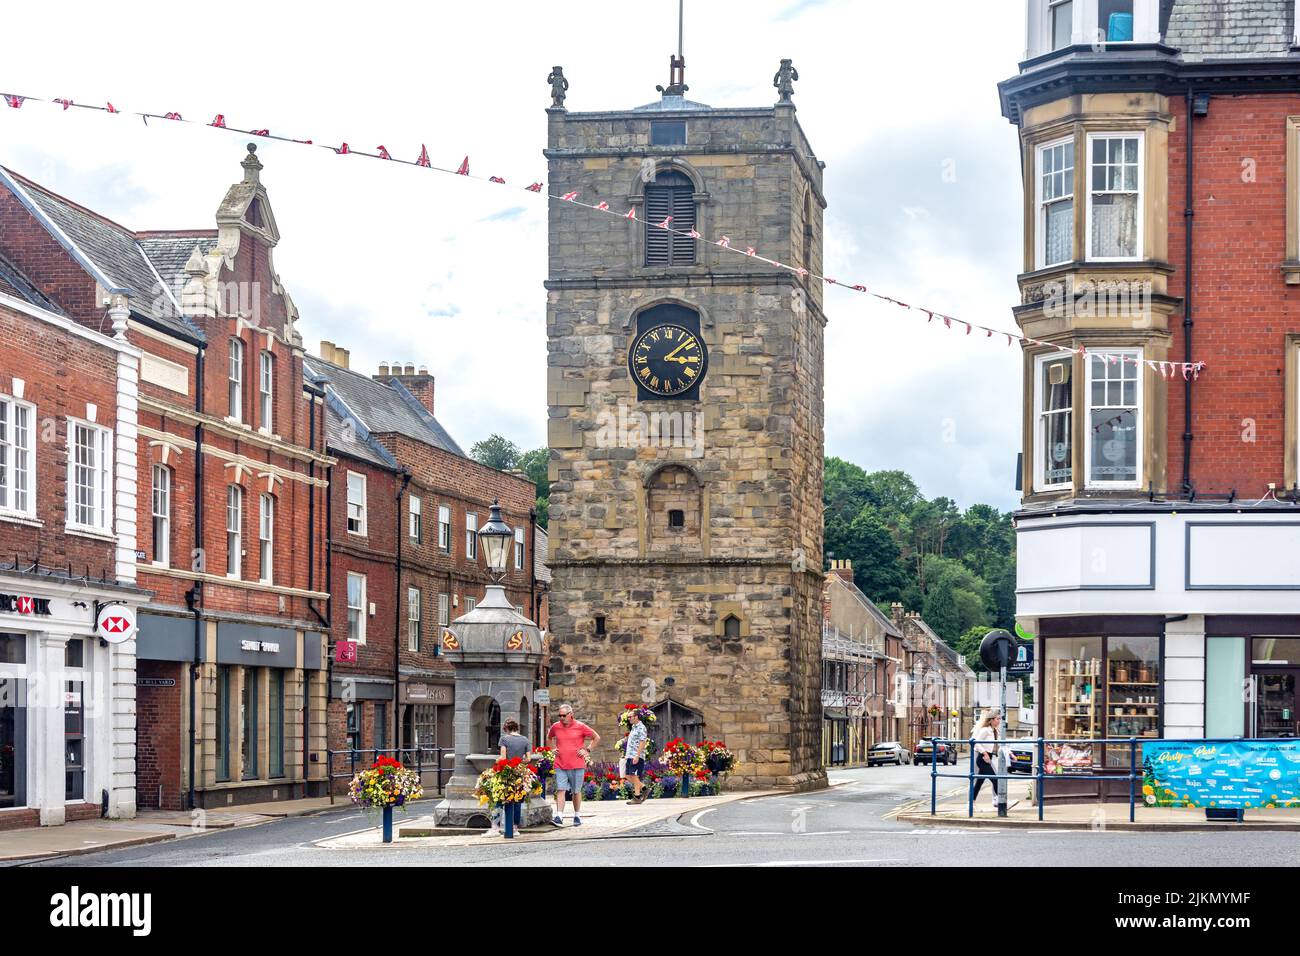 17th Century Morpeth Clock Tower, Market Place, Morpeth, Northumberland, Inghilterra, Regno Unito Foto Stock